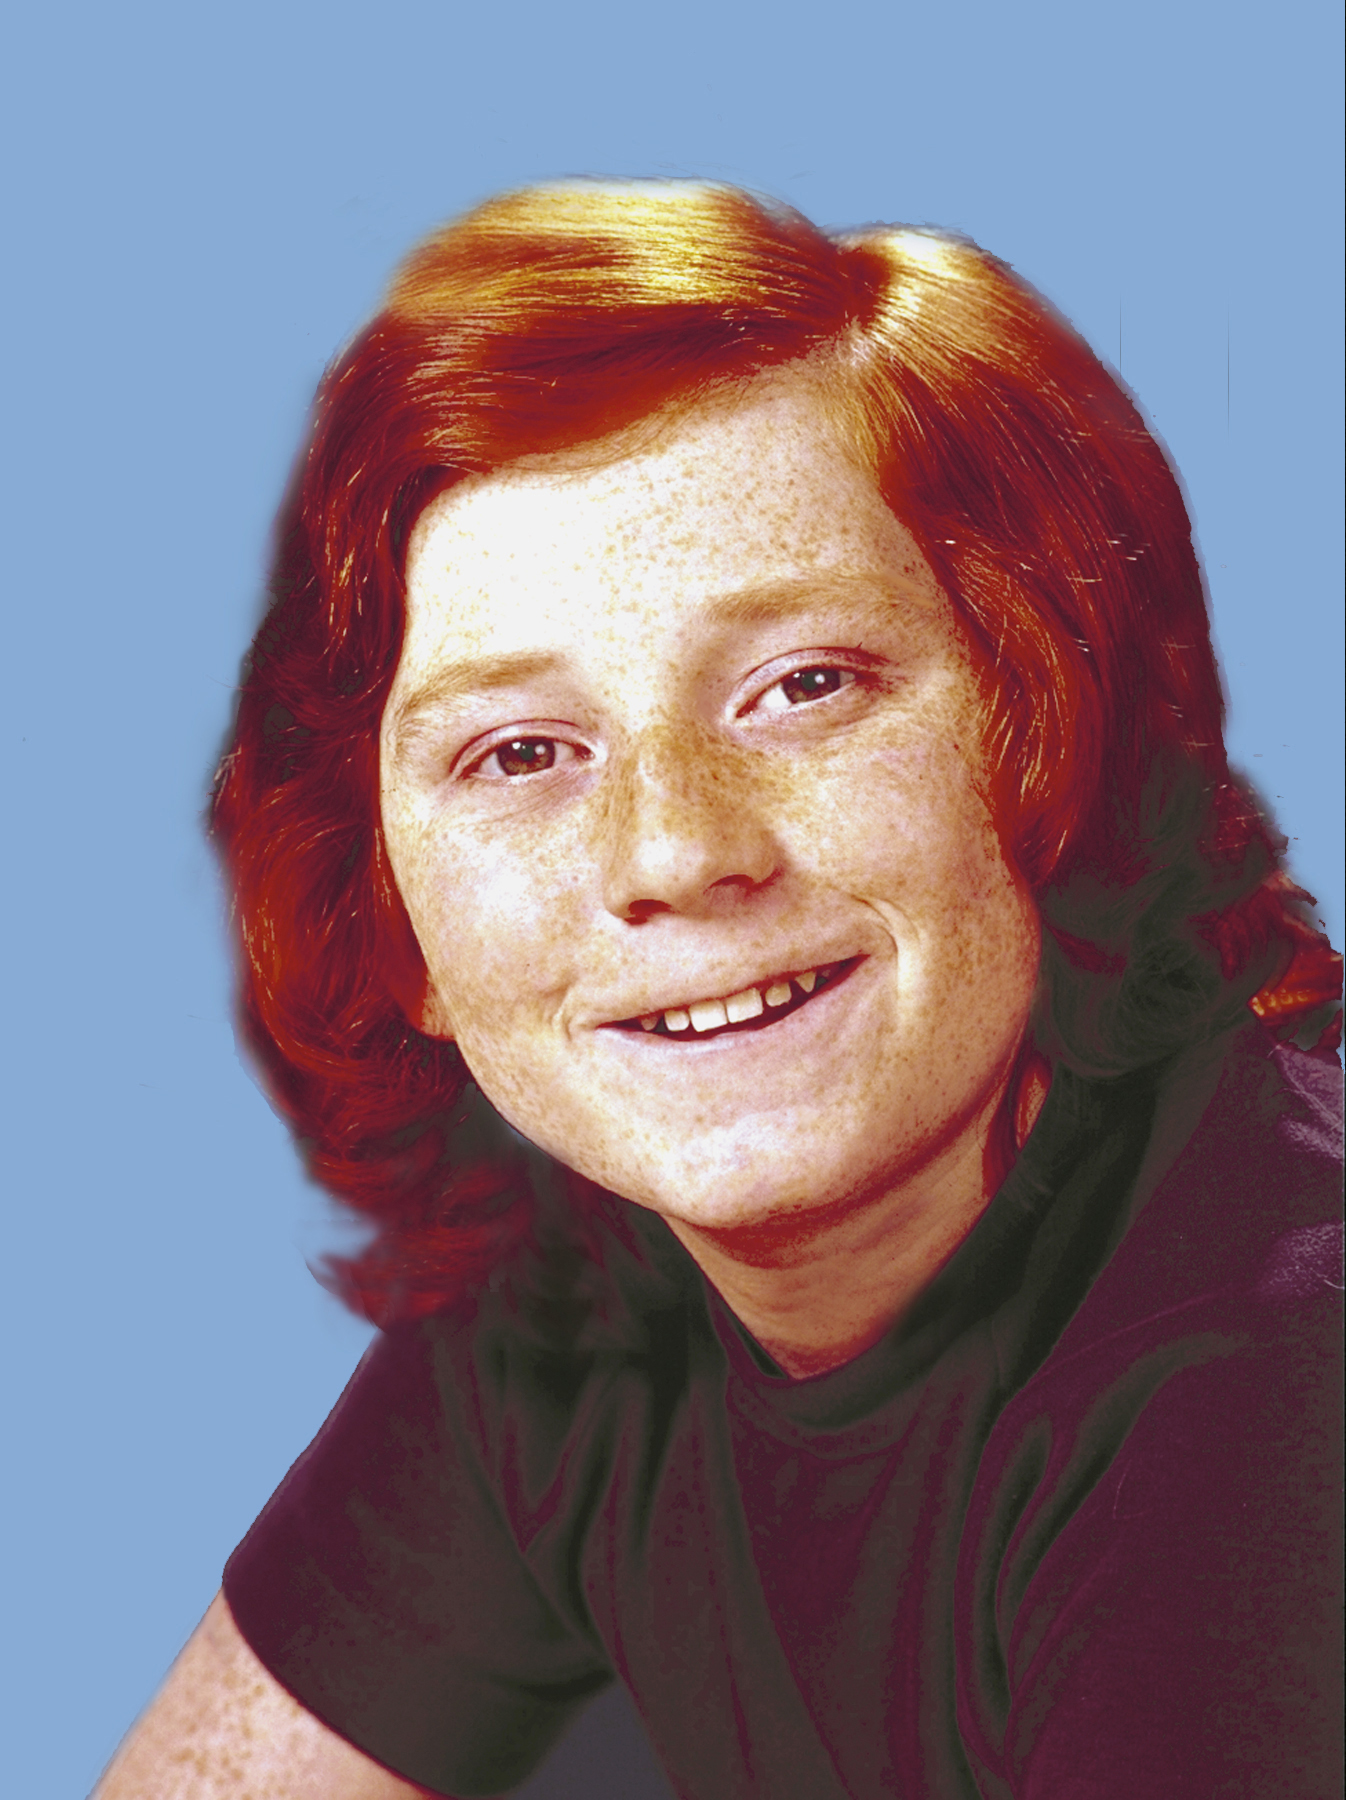 Danny Bonaduce from season two of "The Partridge Family" | Source: Getty Images